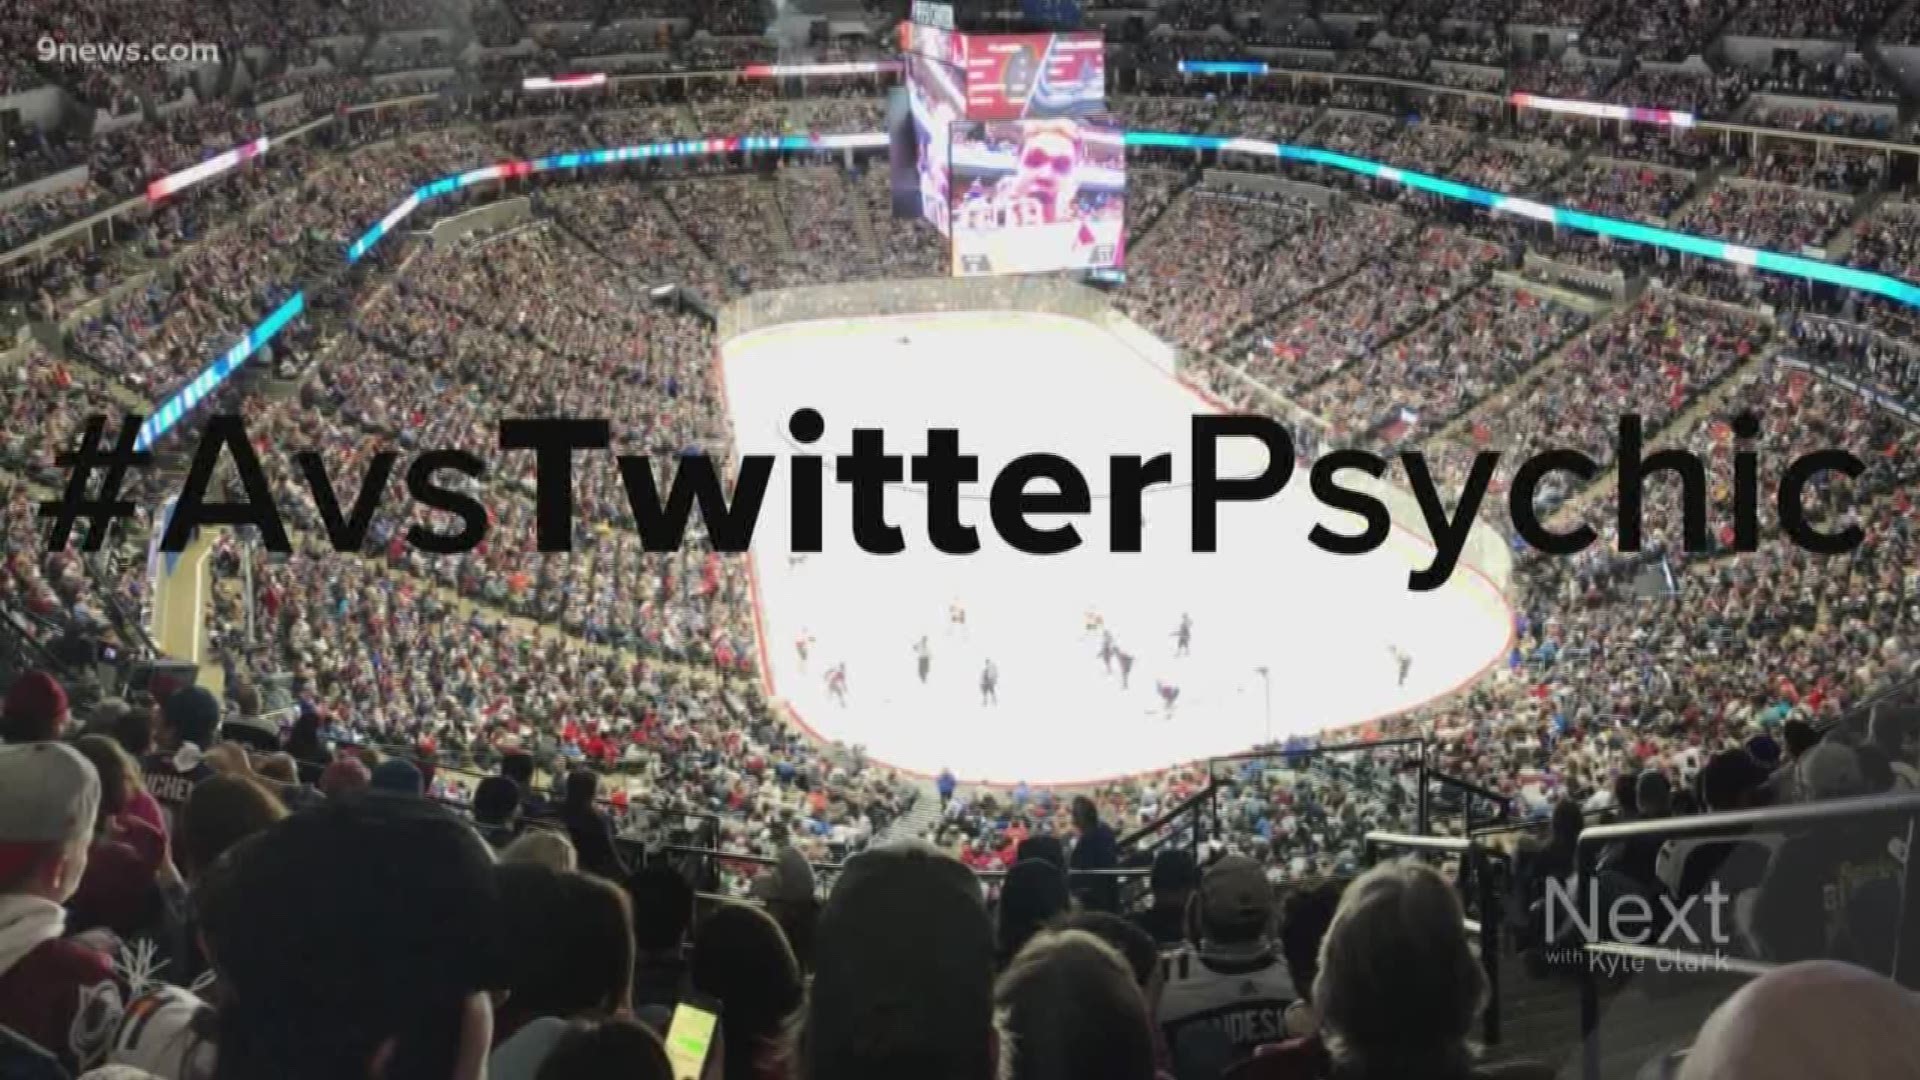 Avalanche fans guess who will score the first goal for the Avalanche, using the hashtag #AvsTwitterPsychic, a game created by a fan podcast, The Avs Hockey Podcast.